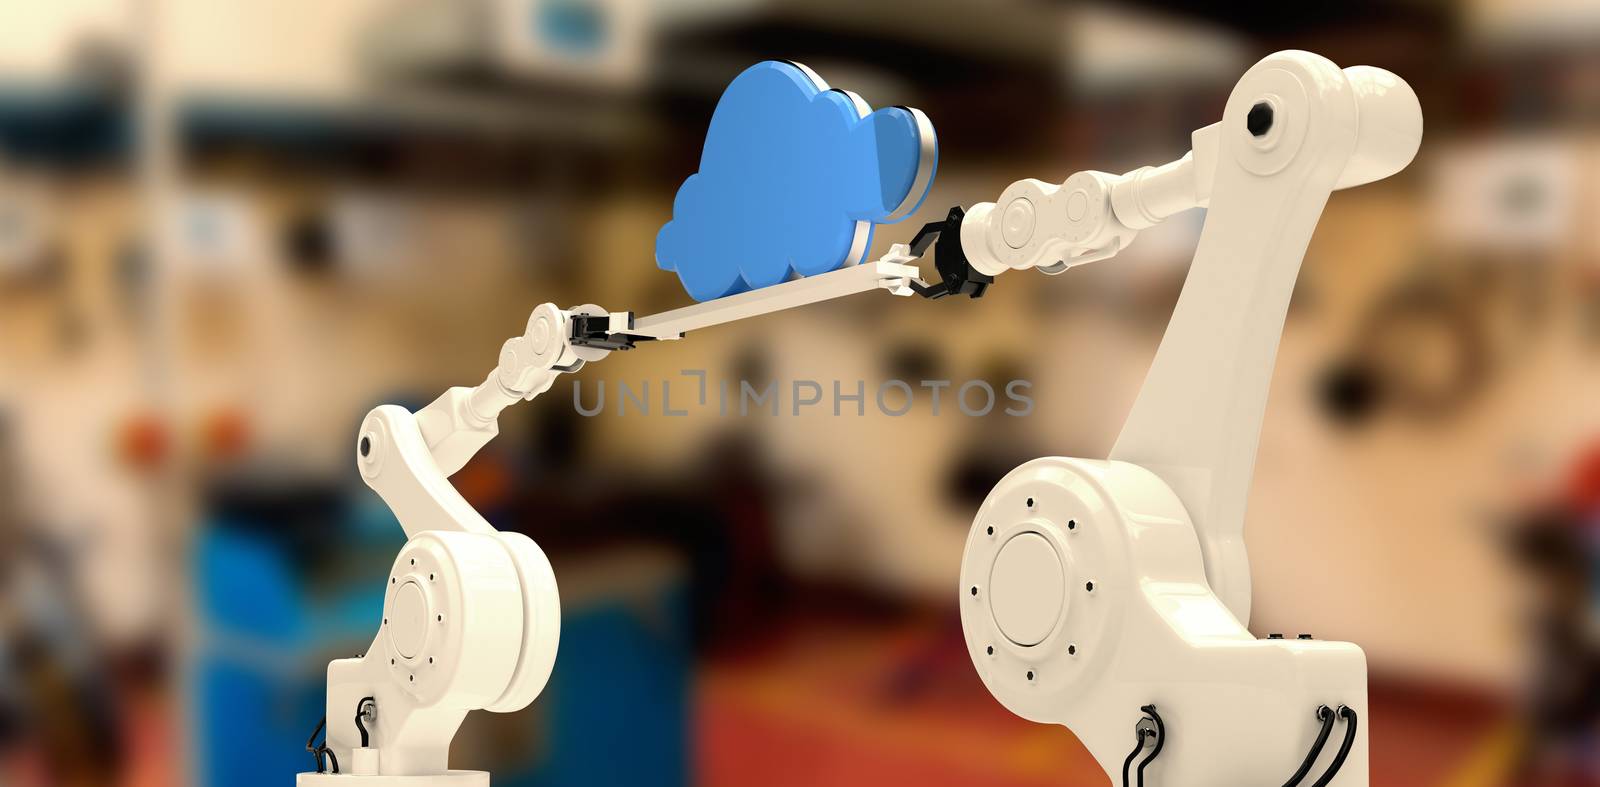 Composite image of robotic hands holding blue cloud against background by Wavebreakmedia